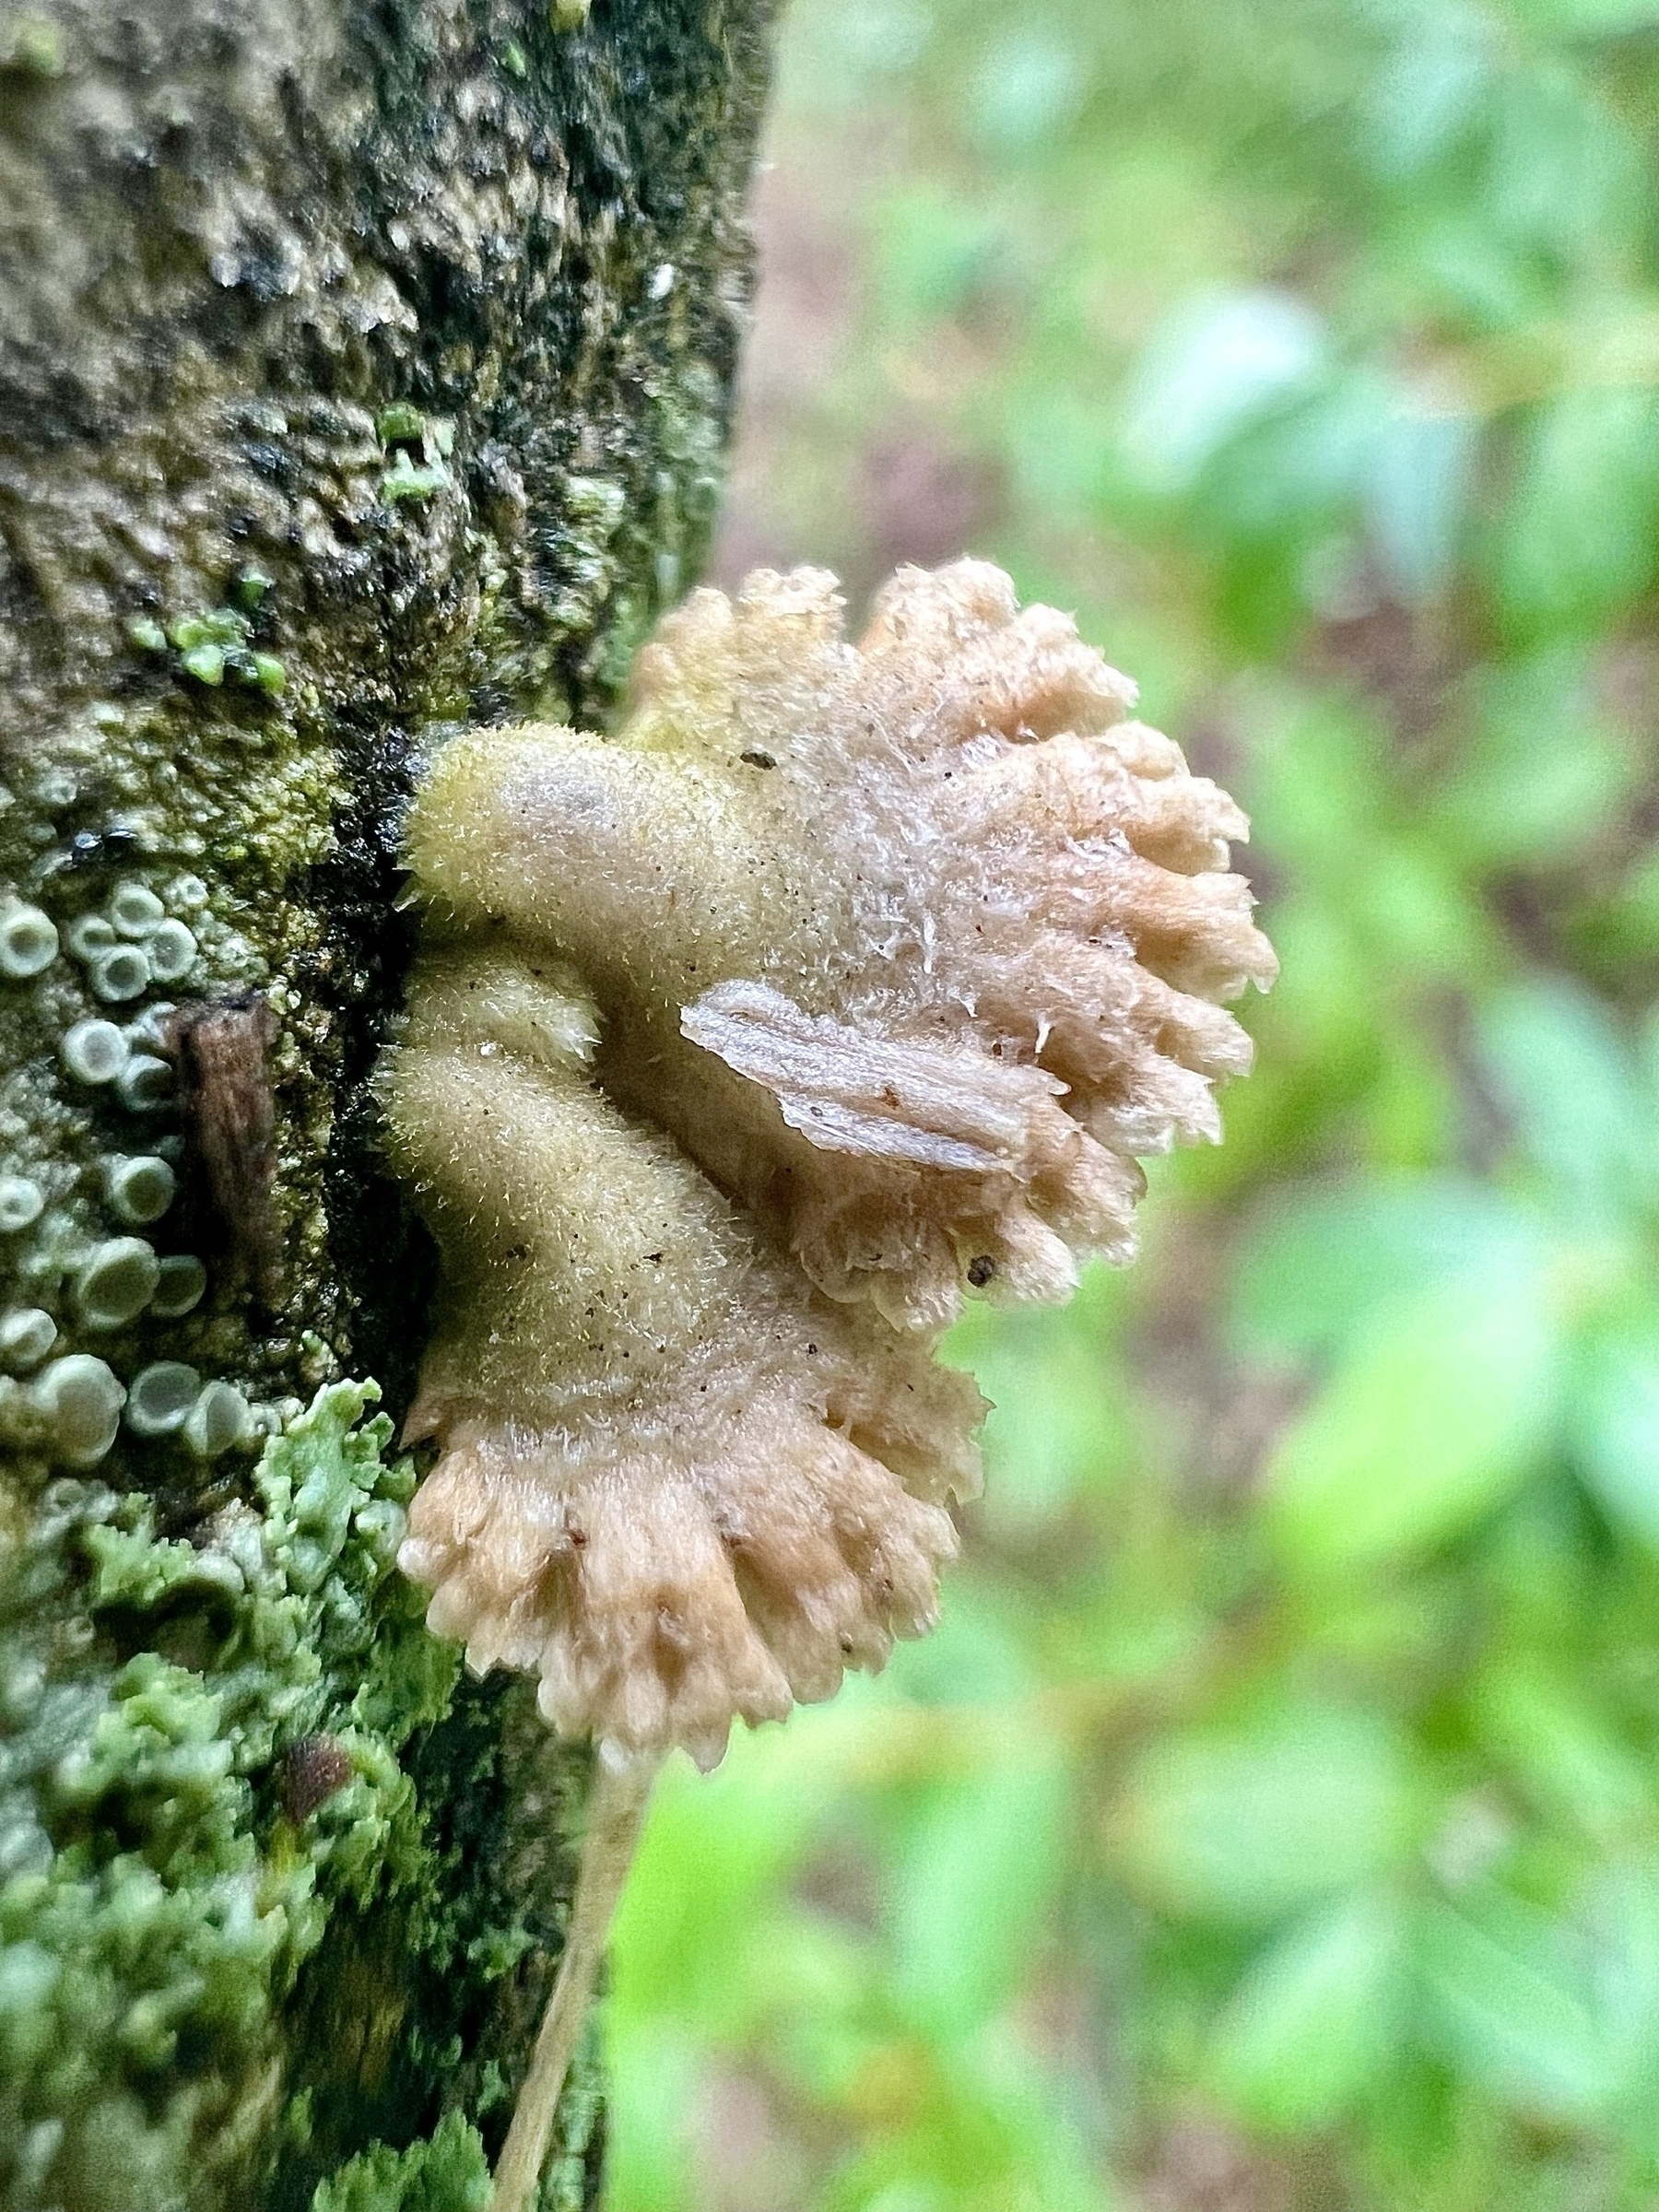 The top of side of very small, cream colored fungi growing on a branch. The texture seems fuzzy or spongy. The outer circumference is not smooth but rather looks like a bunch of small toes.